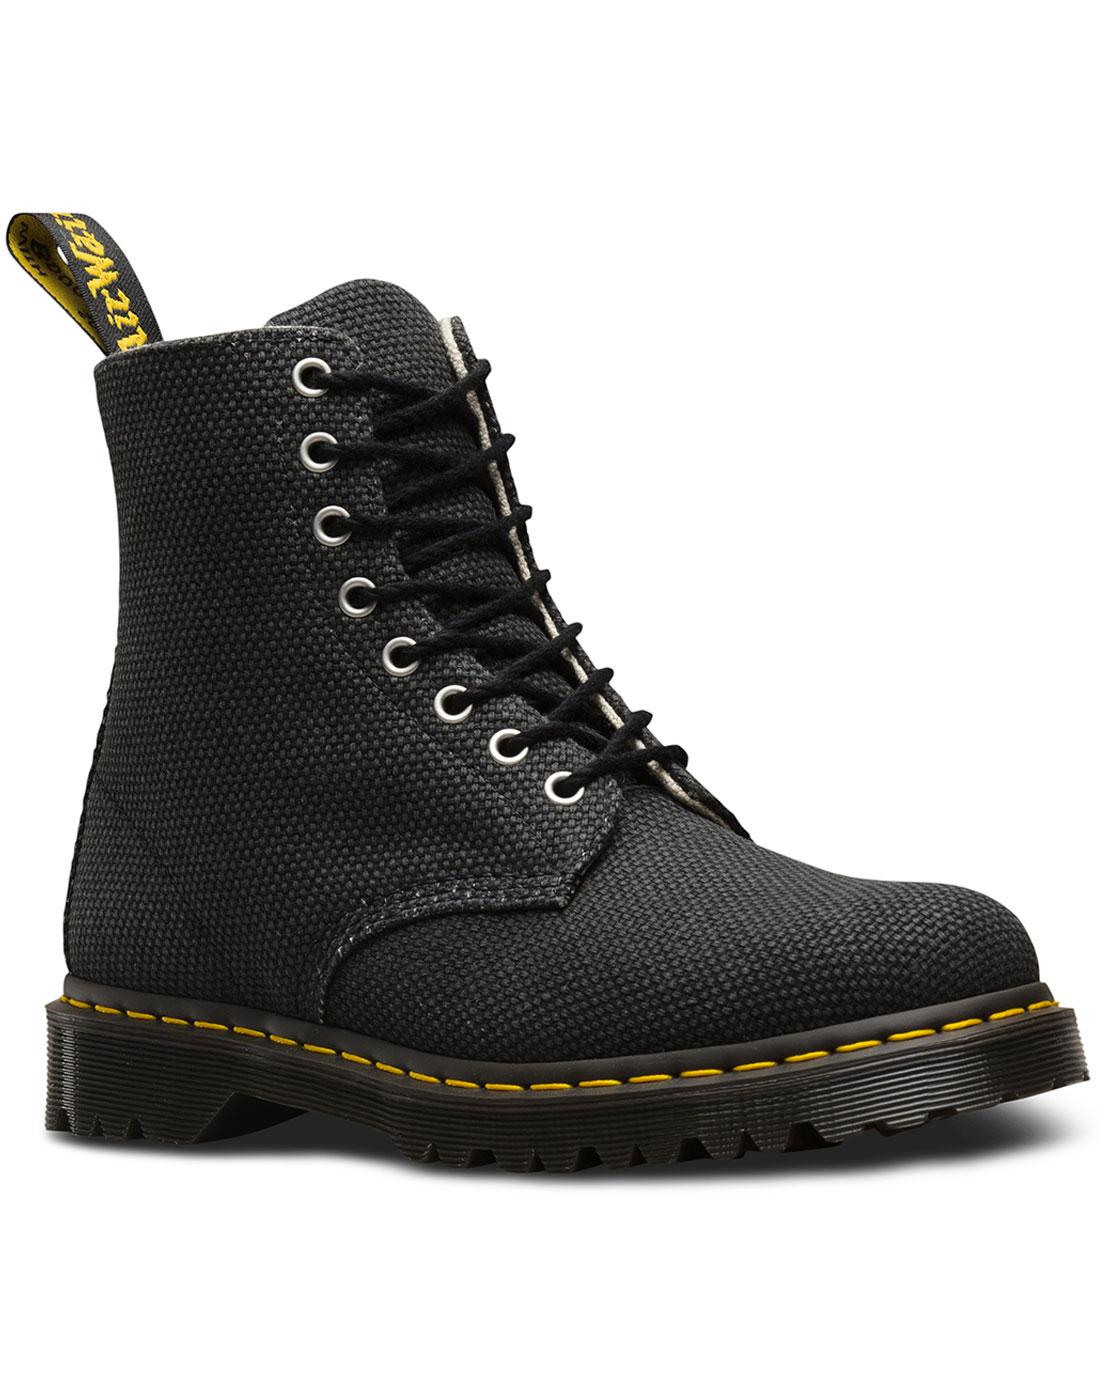 Buy > dr martens canvas boots > in stock